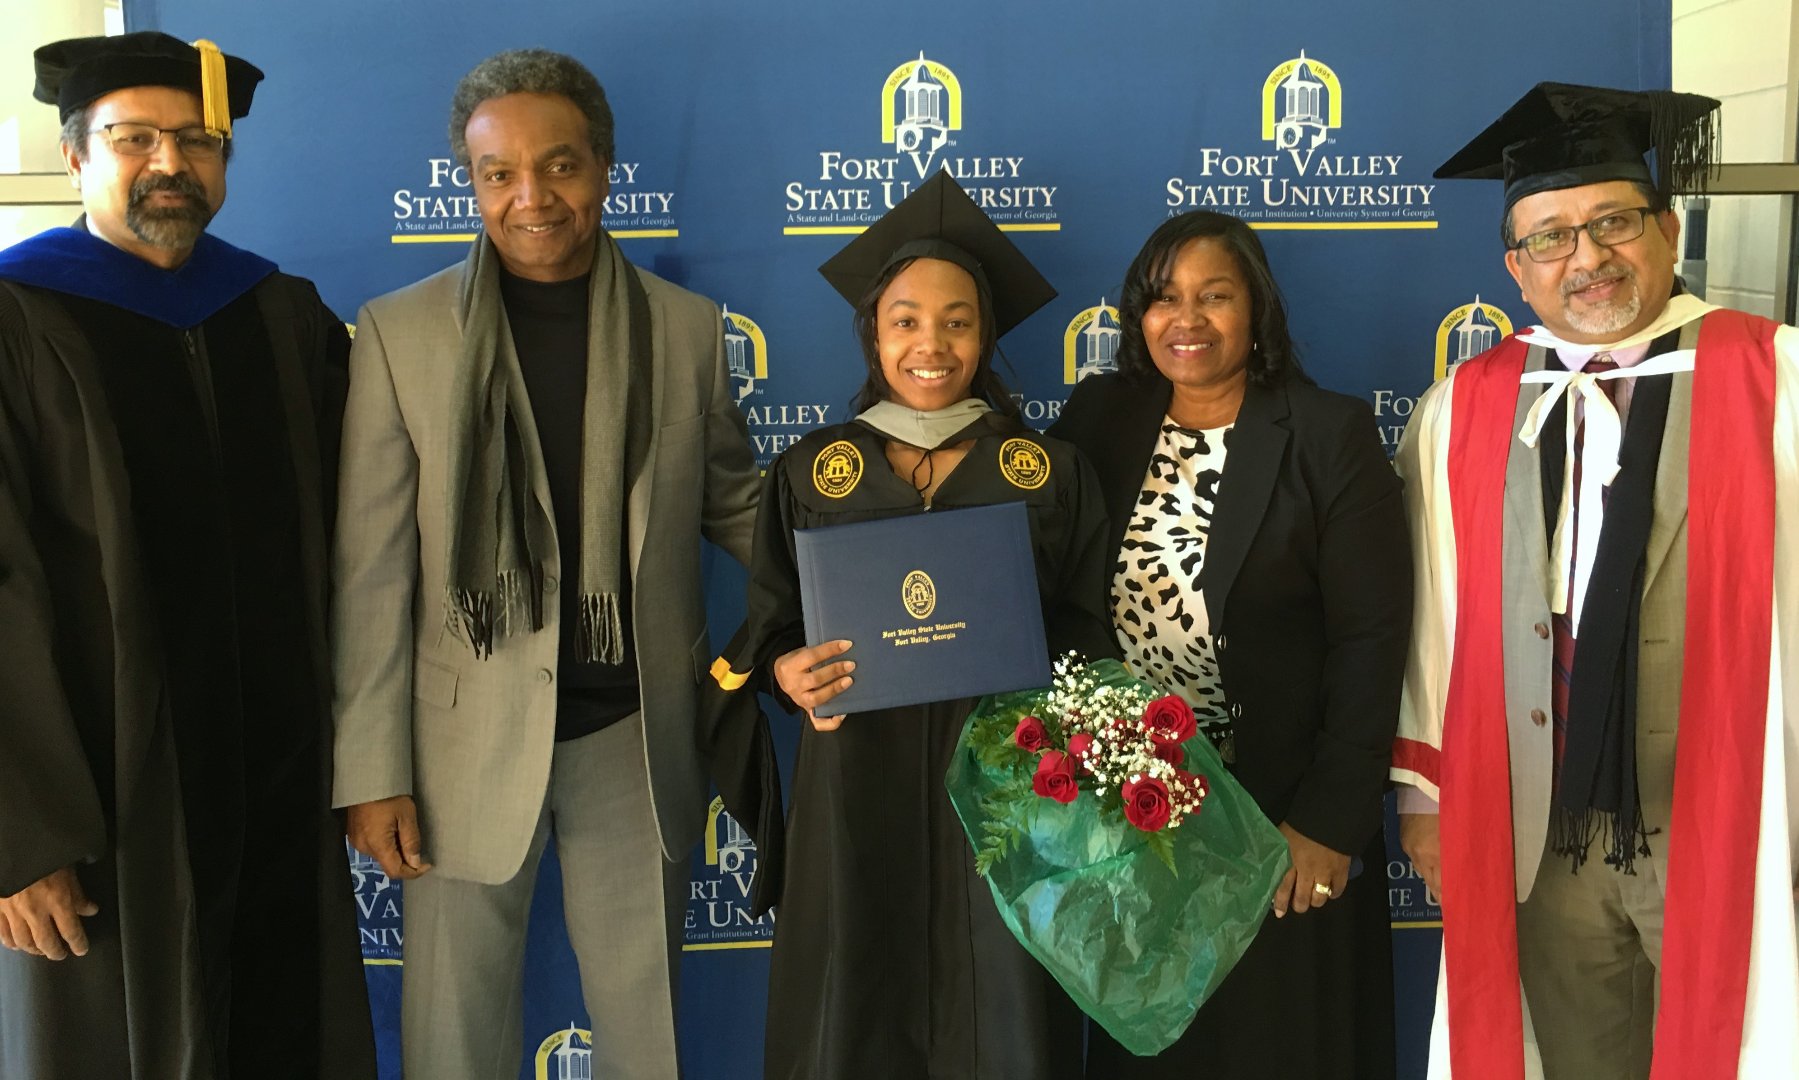 Jackson earned a Master of Science in biotechnology from Fort Valley State University in 2016. She is pictured with her parents, along with Dr. Govind Kannan (left), FVSU’s associate dean for research, and Dr. Nirmal Joshee (right), plant science professor.